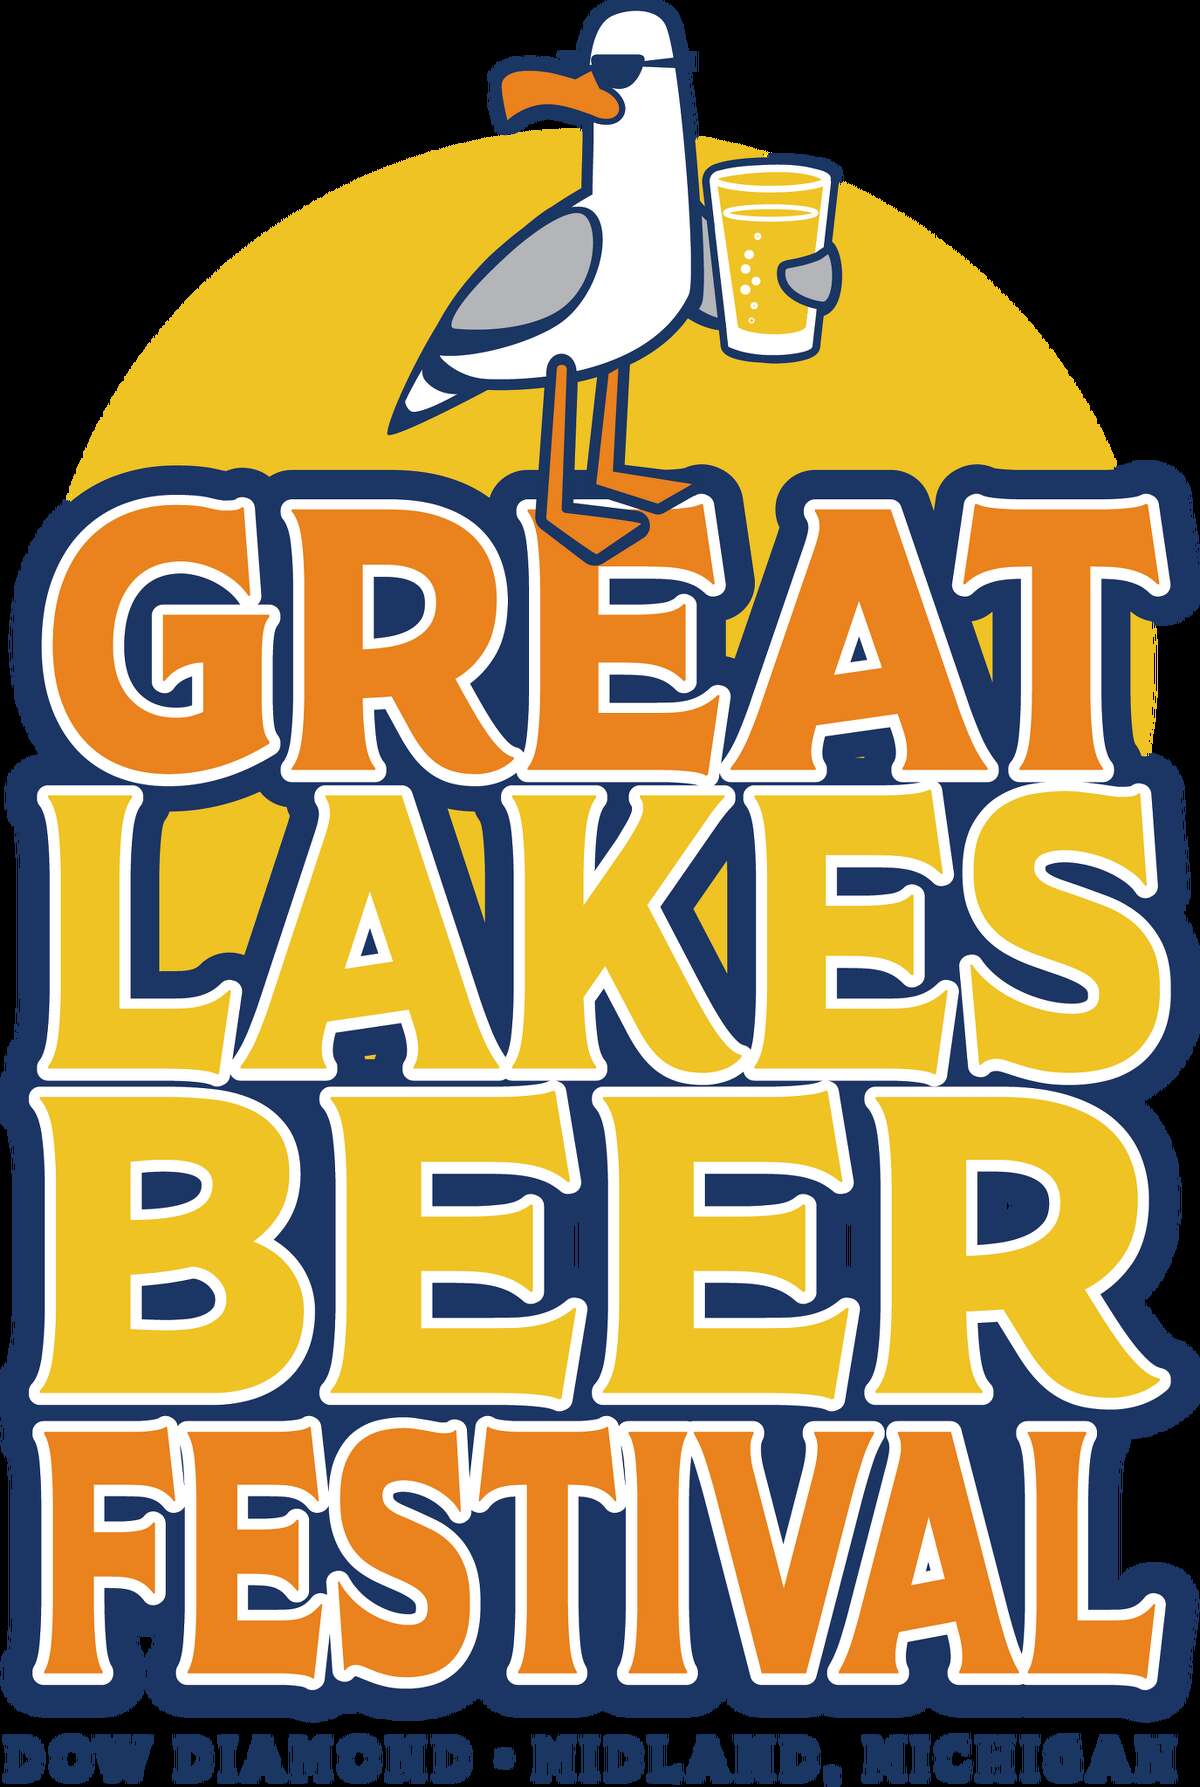 The Great Lakes Beer Festival is Aug. 20 at Dow Diamond in Midland. 